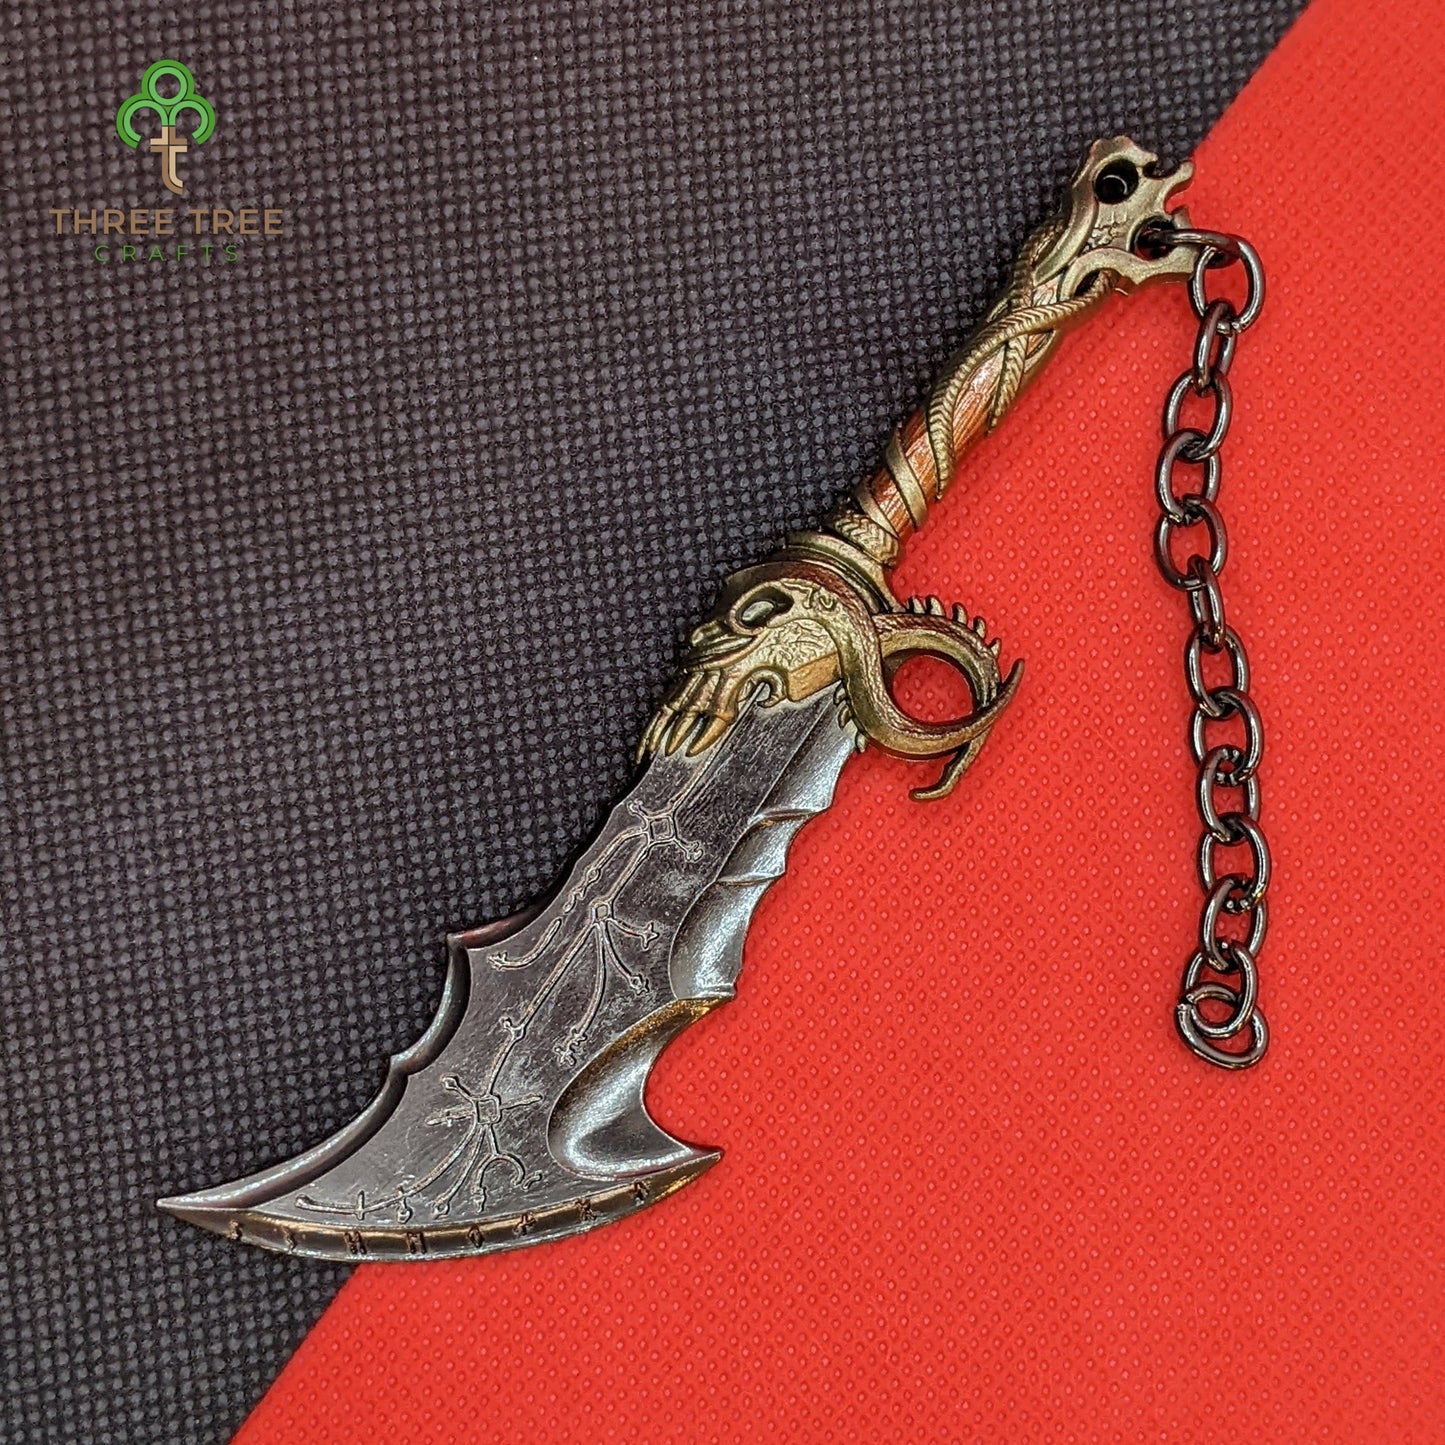 Three Tree Crafts Collectible God Of War Blades Of Chaos Inspired Collectible Single